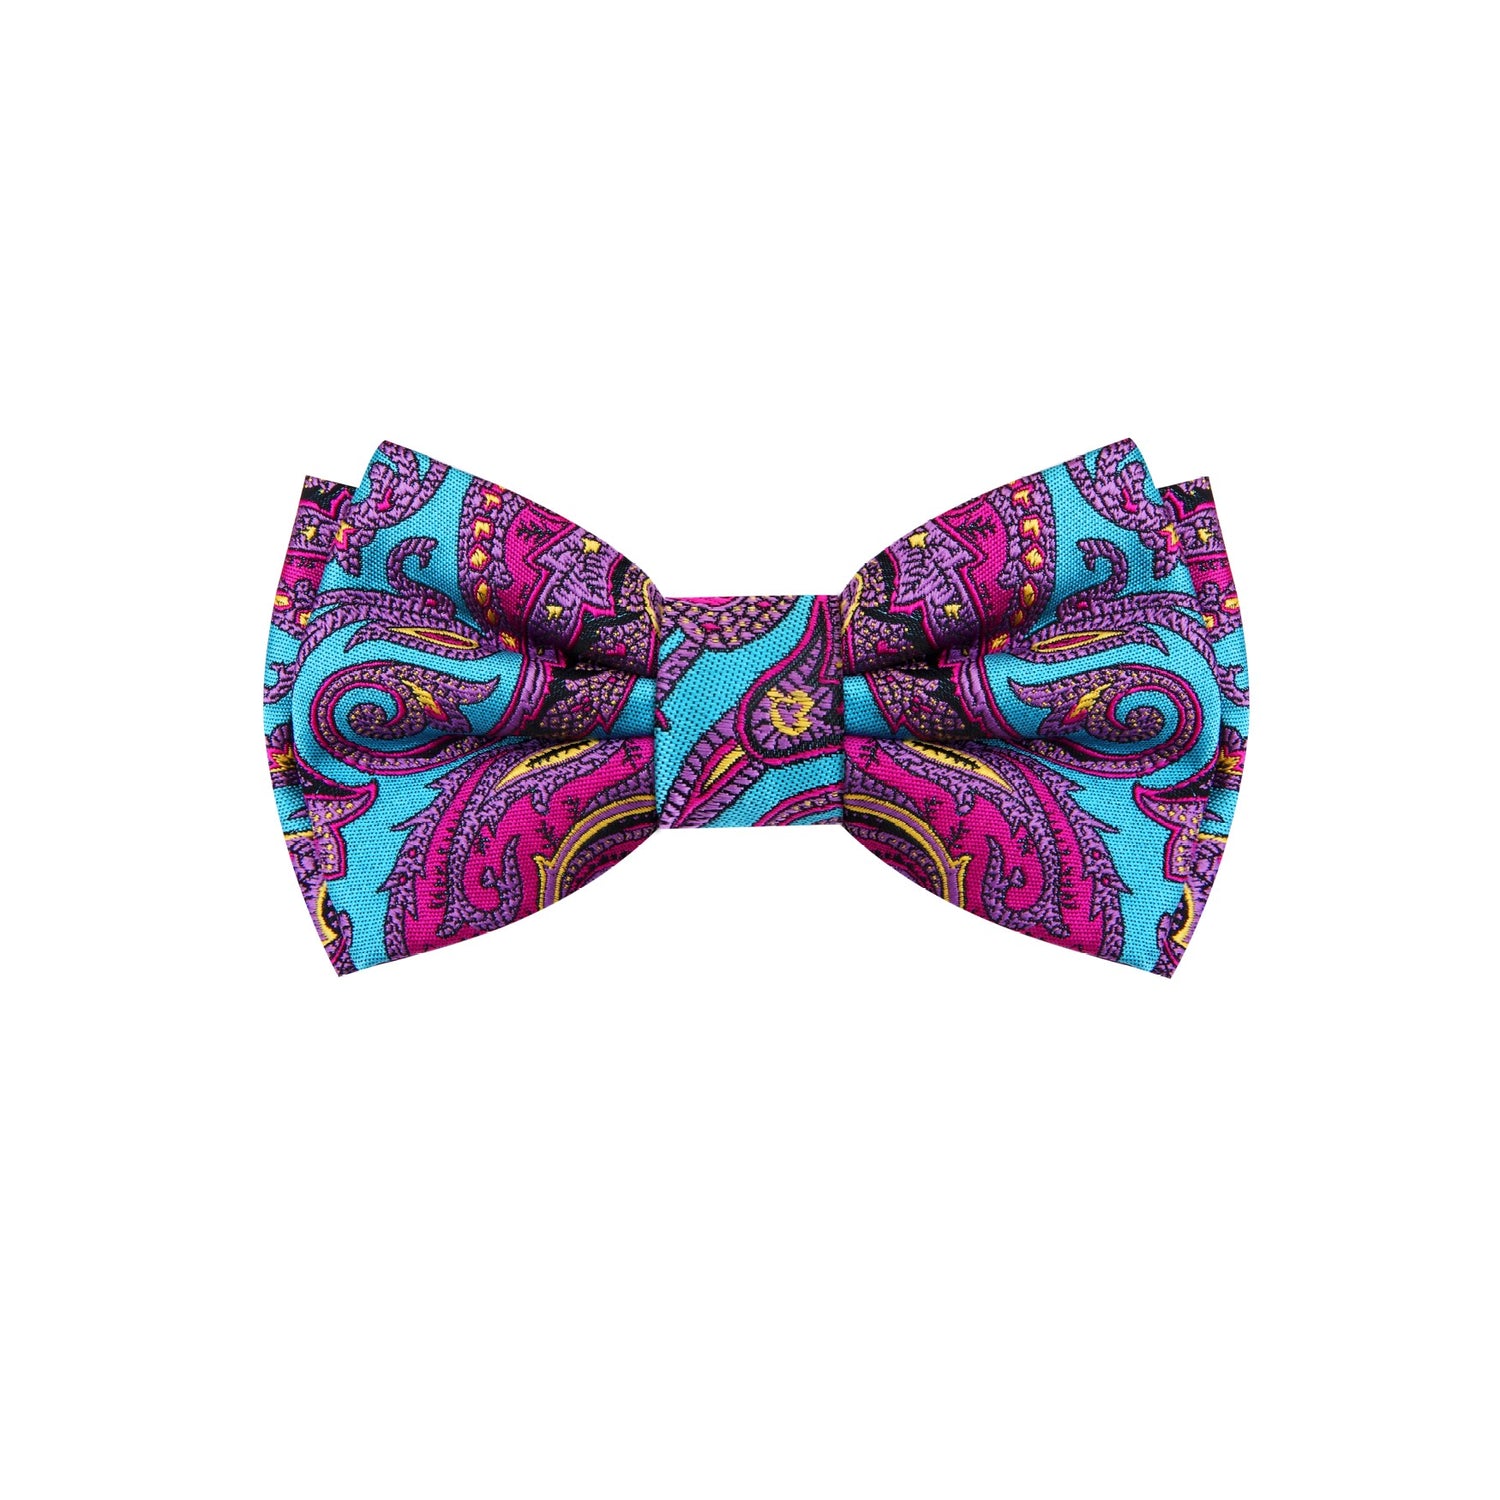 A Light Teal, Pink Yellow Color Intricate Paisley Pattern Silk Kids Pre-Tied Bow Tie 